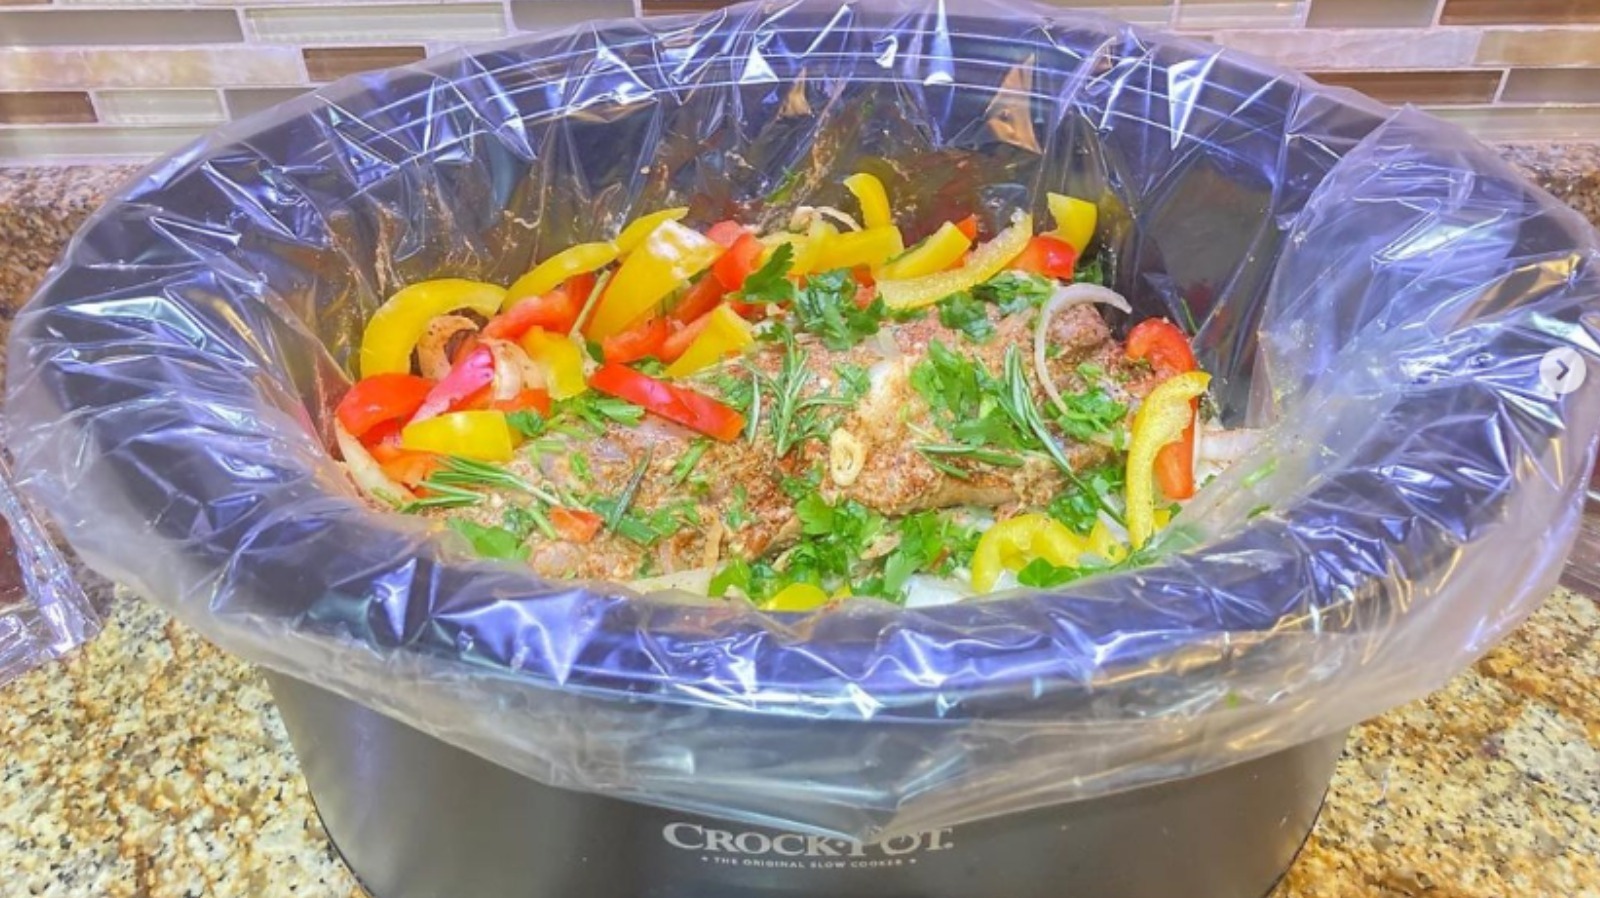 Are Plastic Liners Safe to Use in Your Slow Cooker?